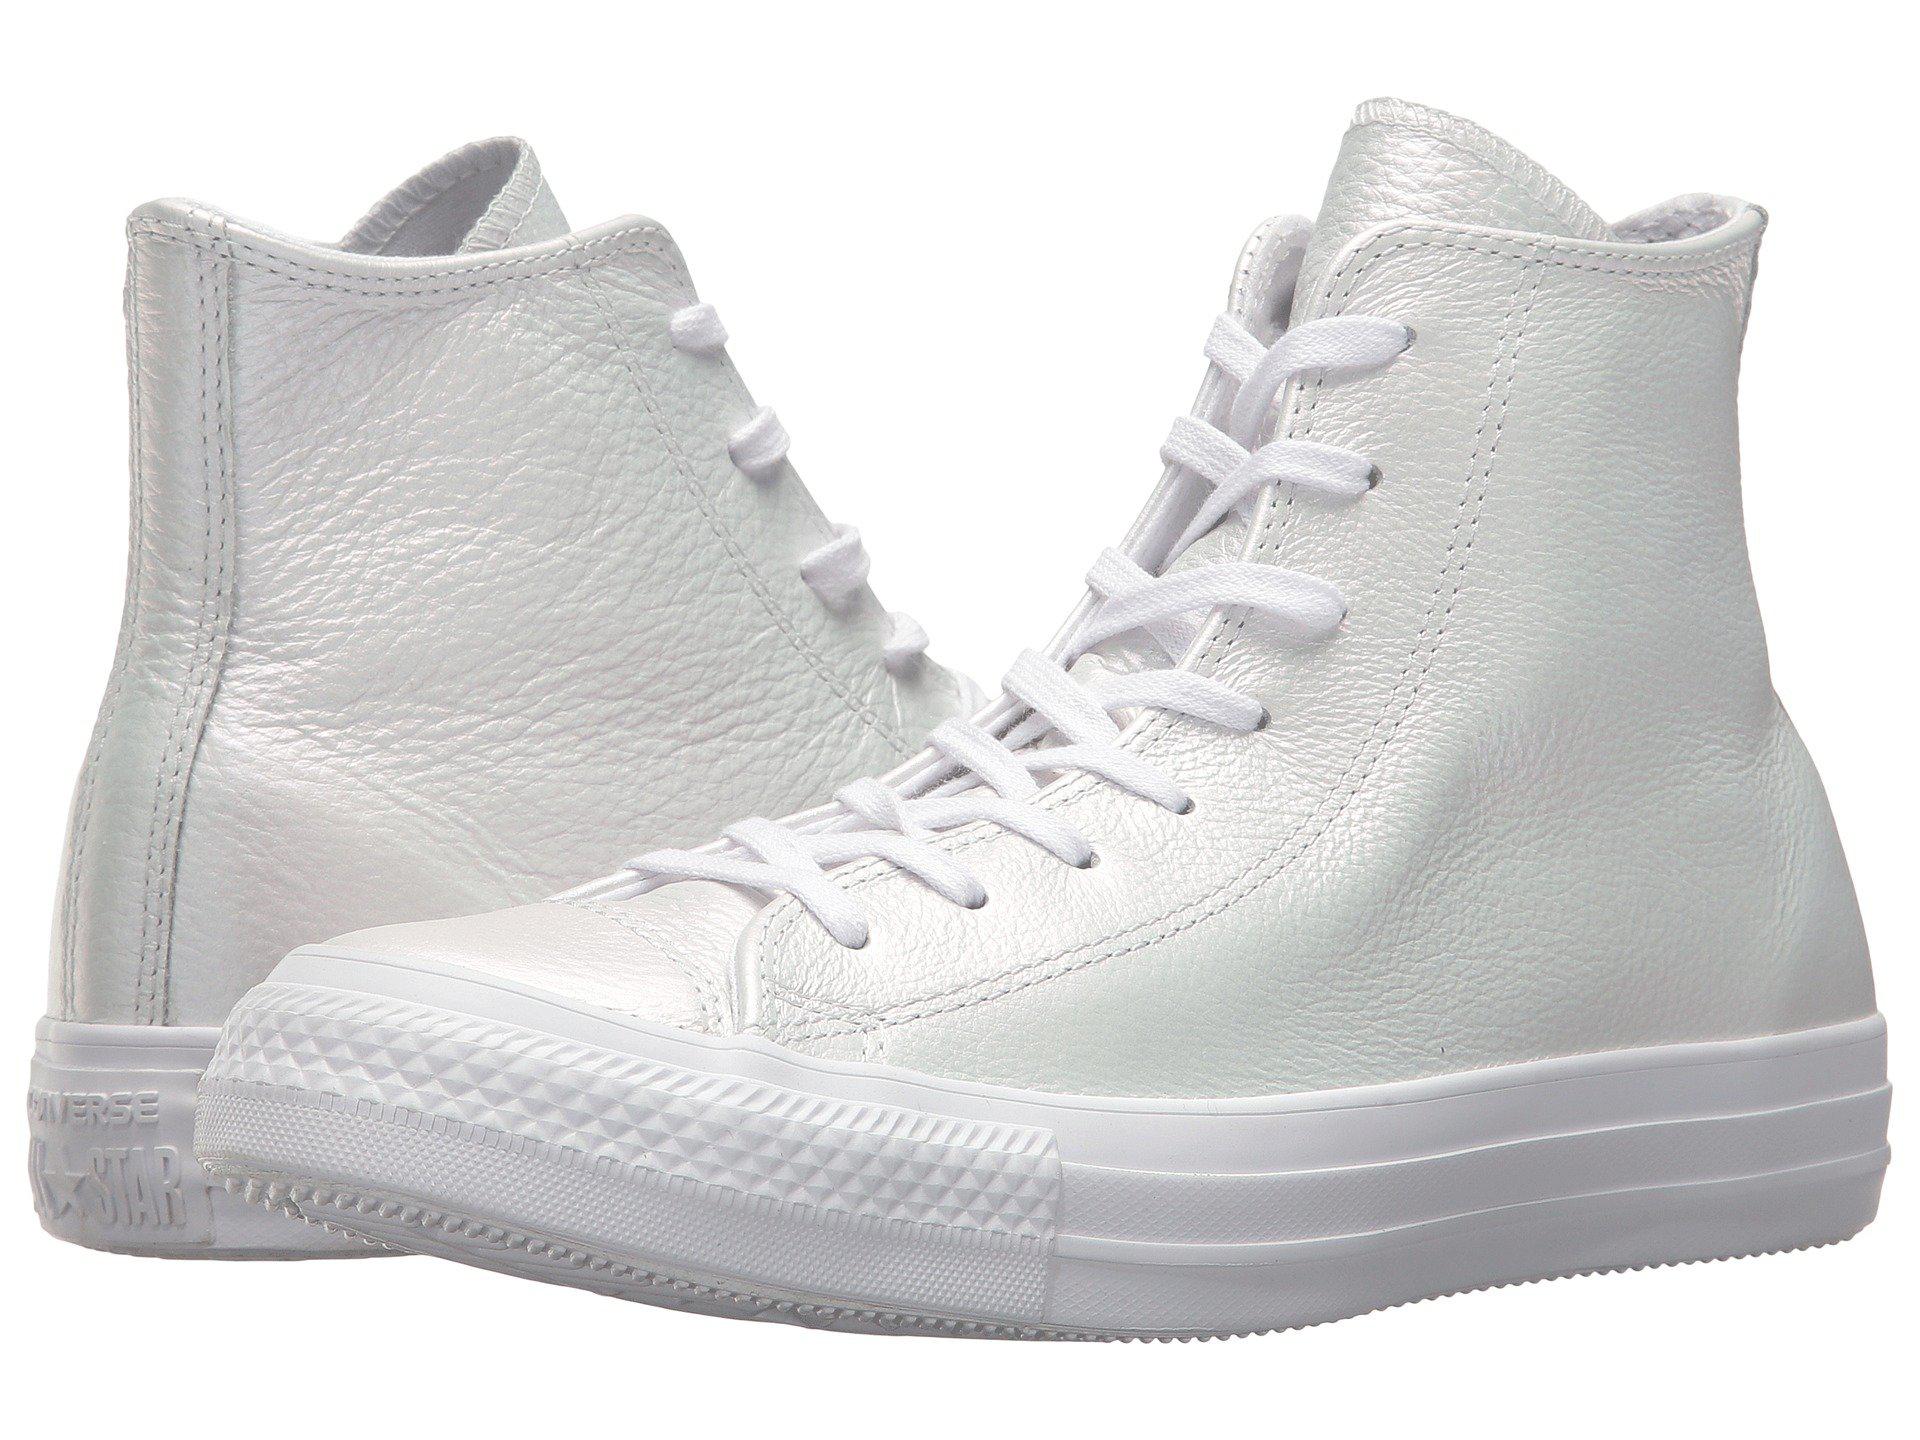 Converse WhiteWhiteWhite Chuck Taylor All Star Iridescent Leather Hi 